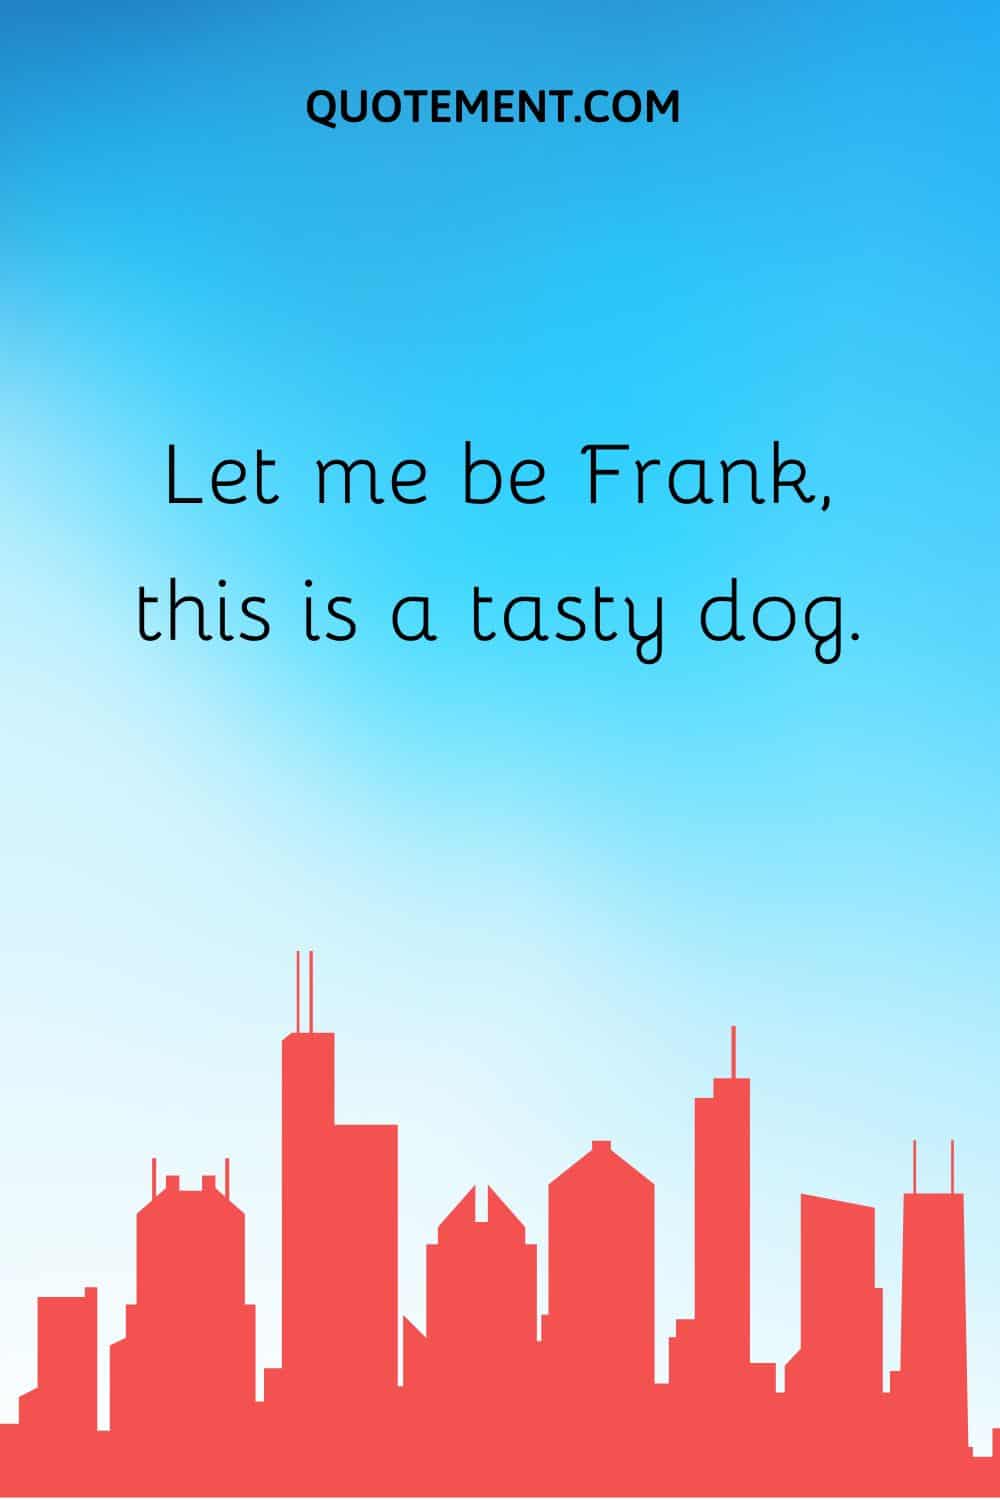 Let me be Frank, this is a tasty dog.